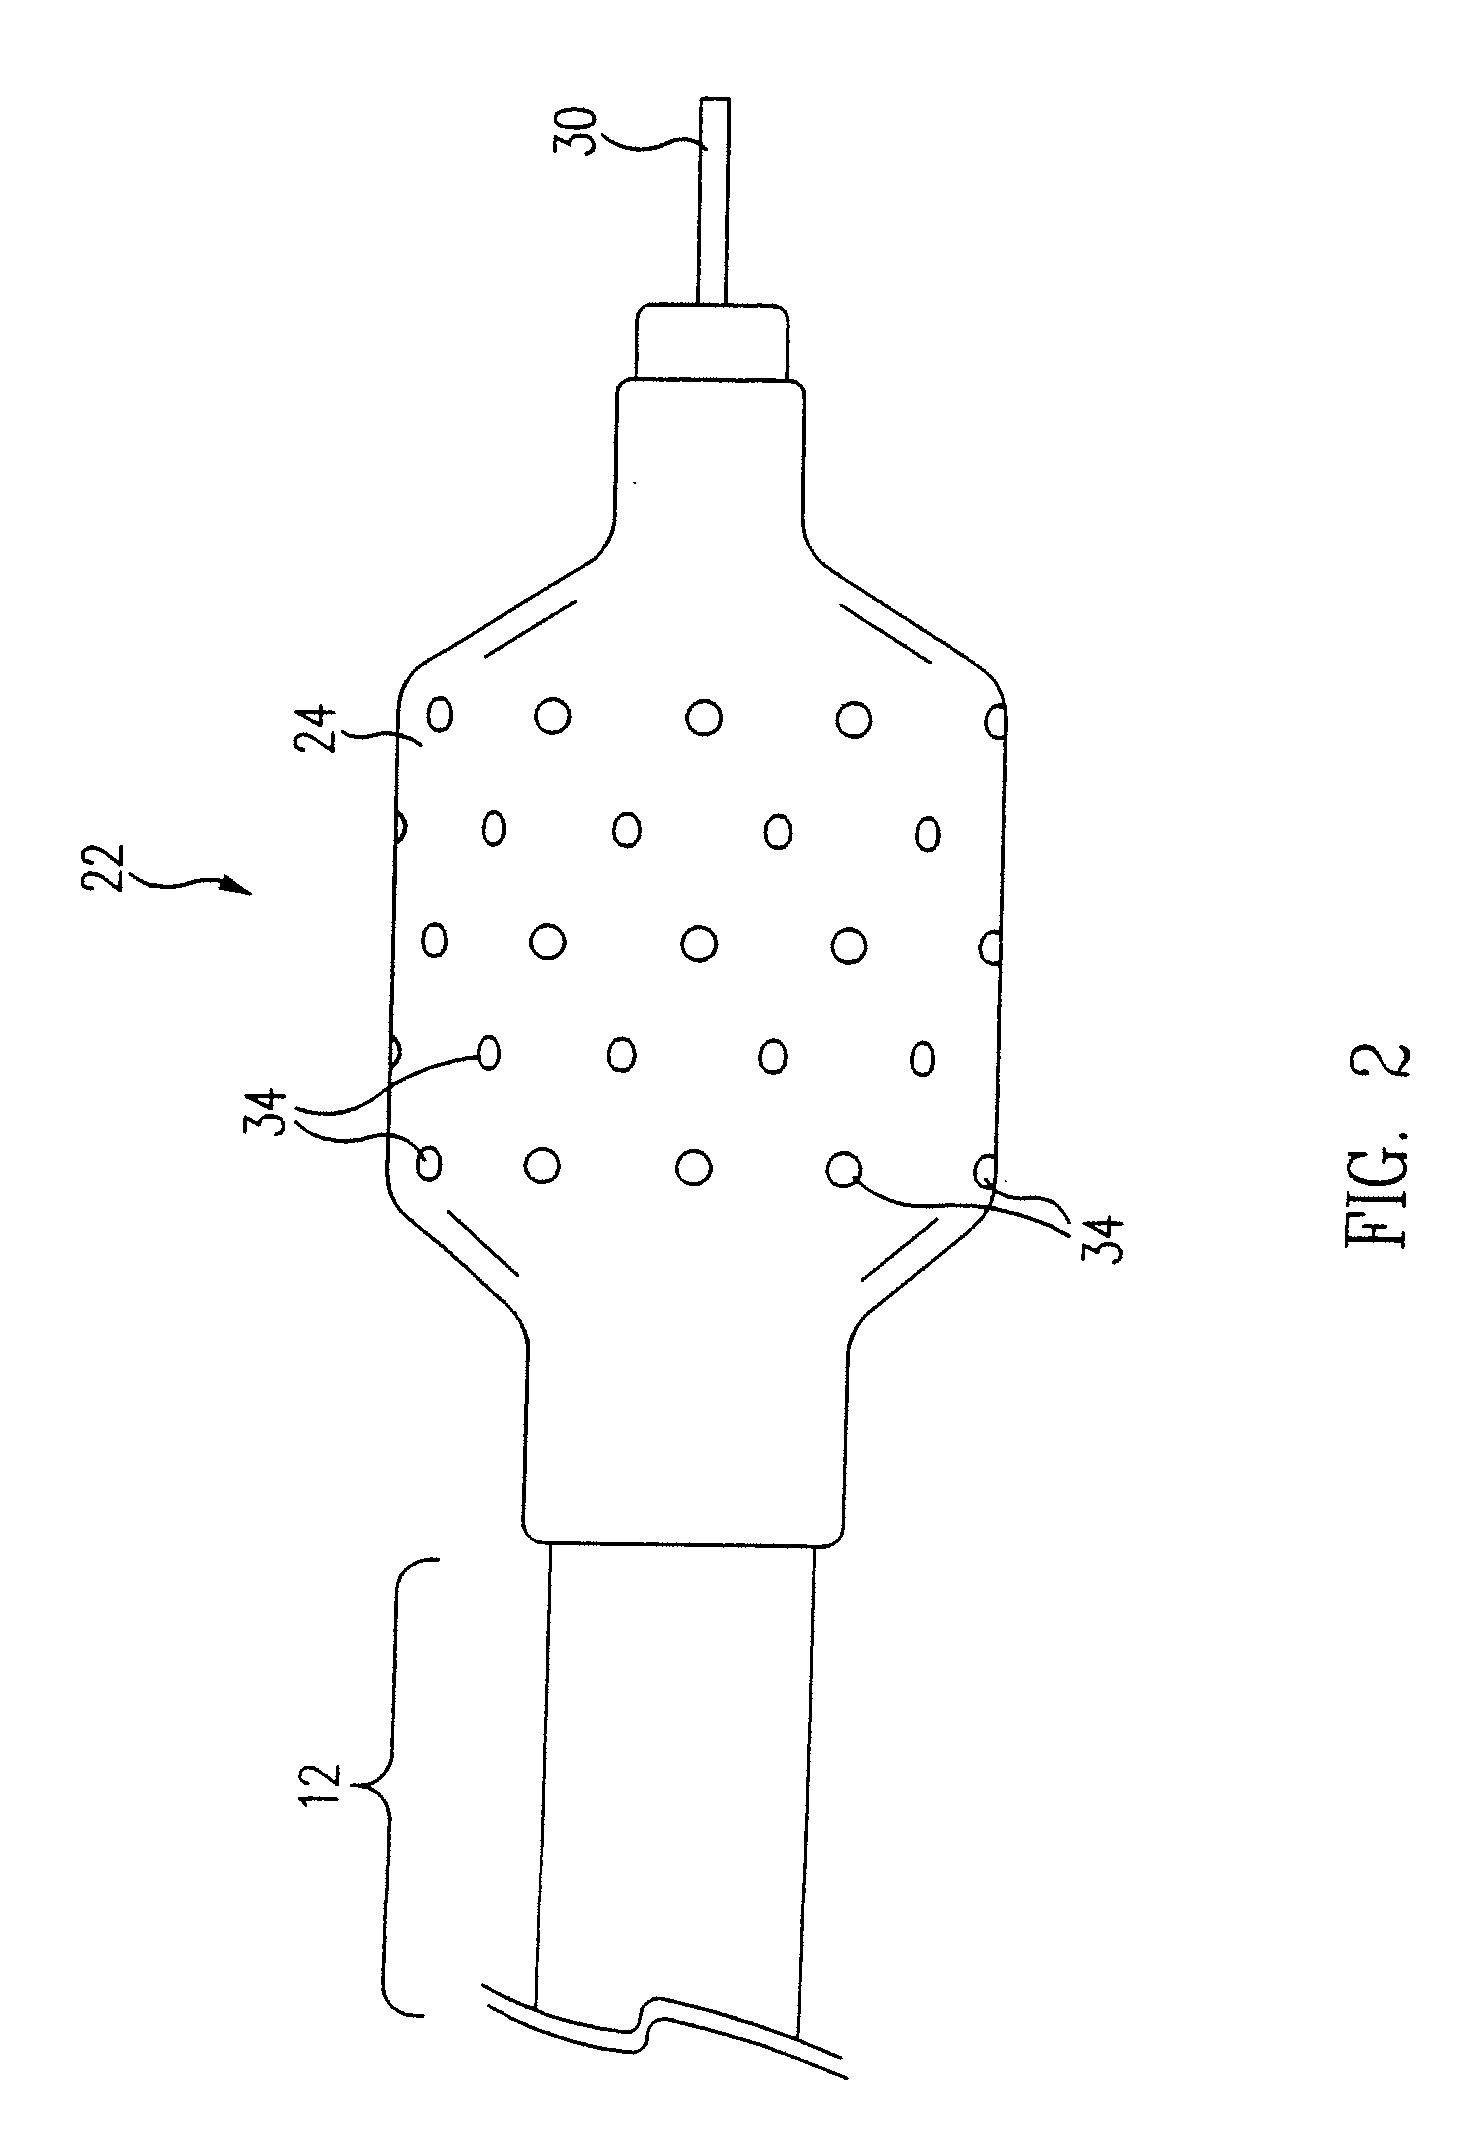 Balloon catheter for delivering therapeutic agents